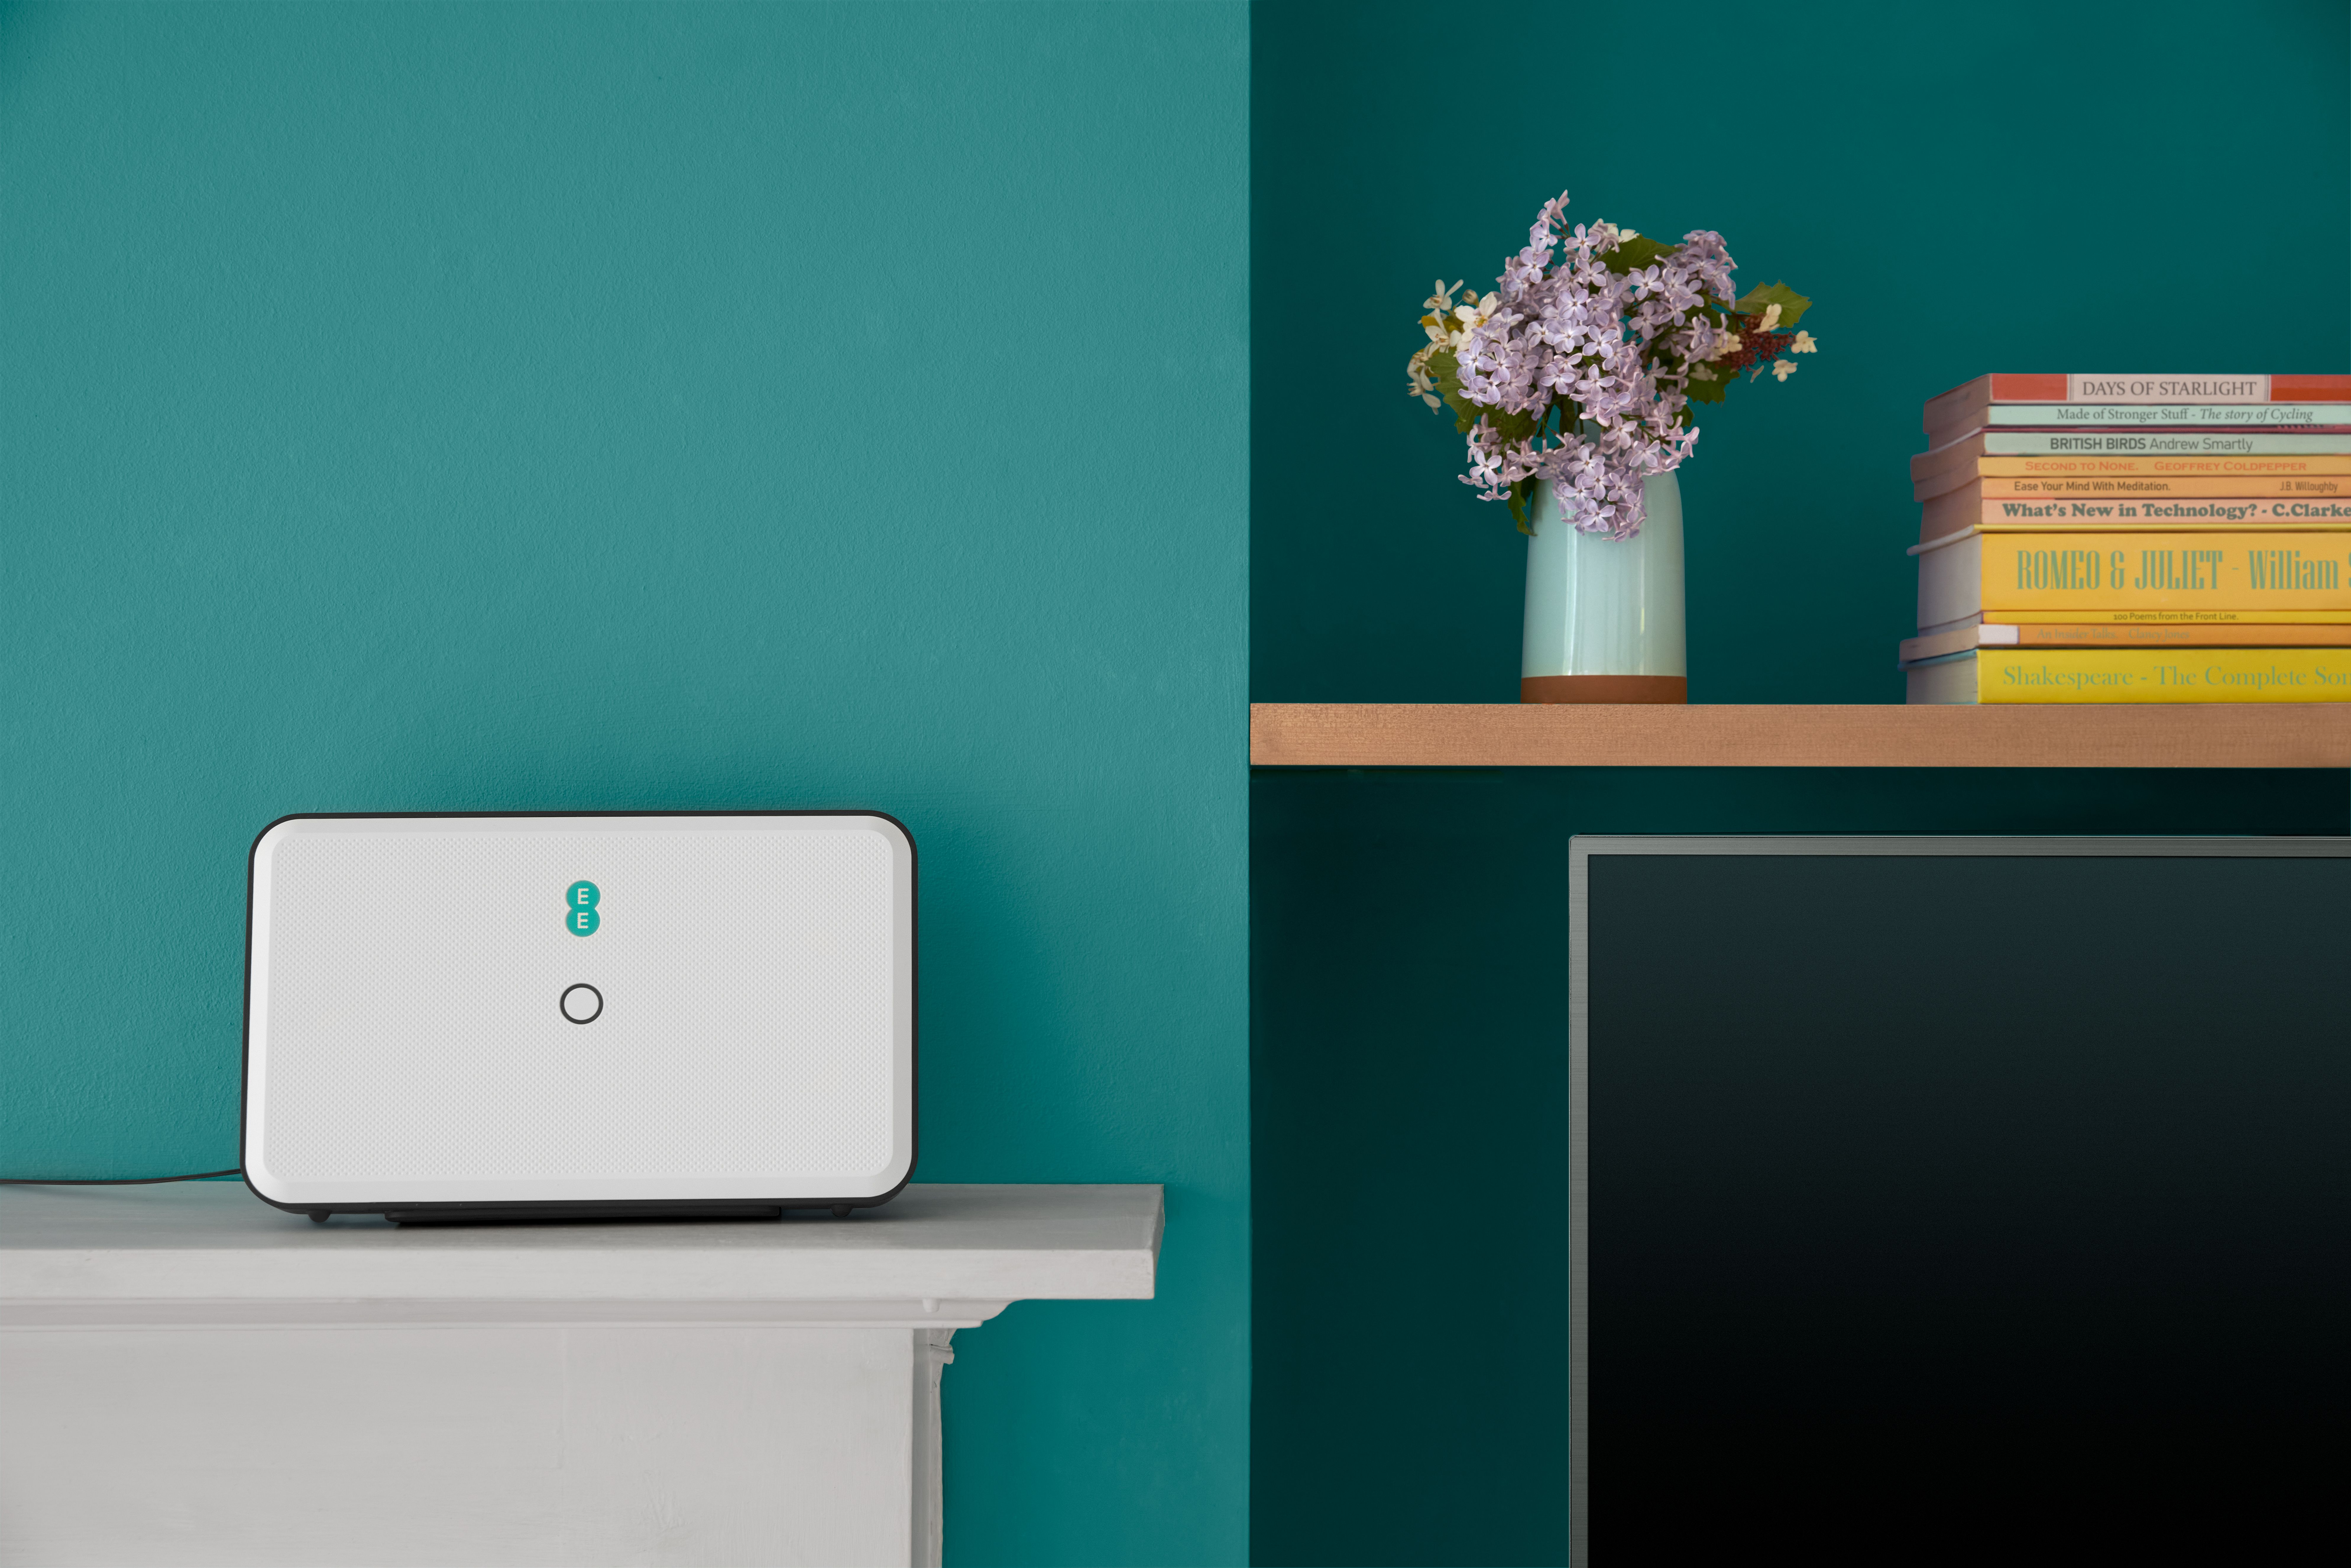 EE reveals Smart WiFi home broadband which comes with a mesh network photo 1